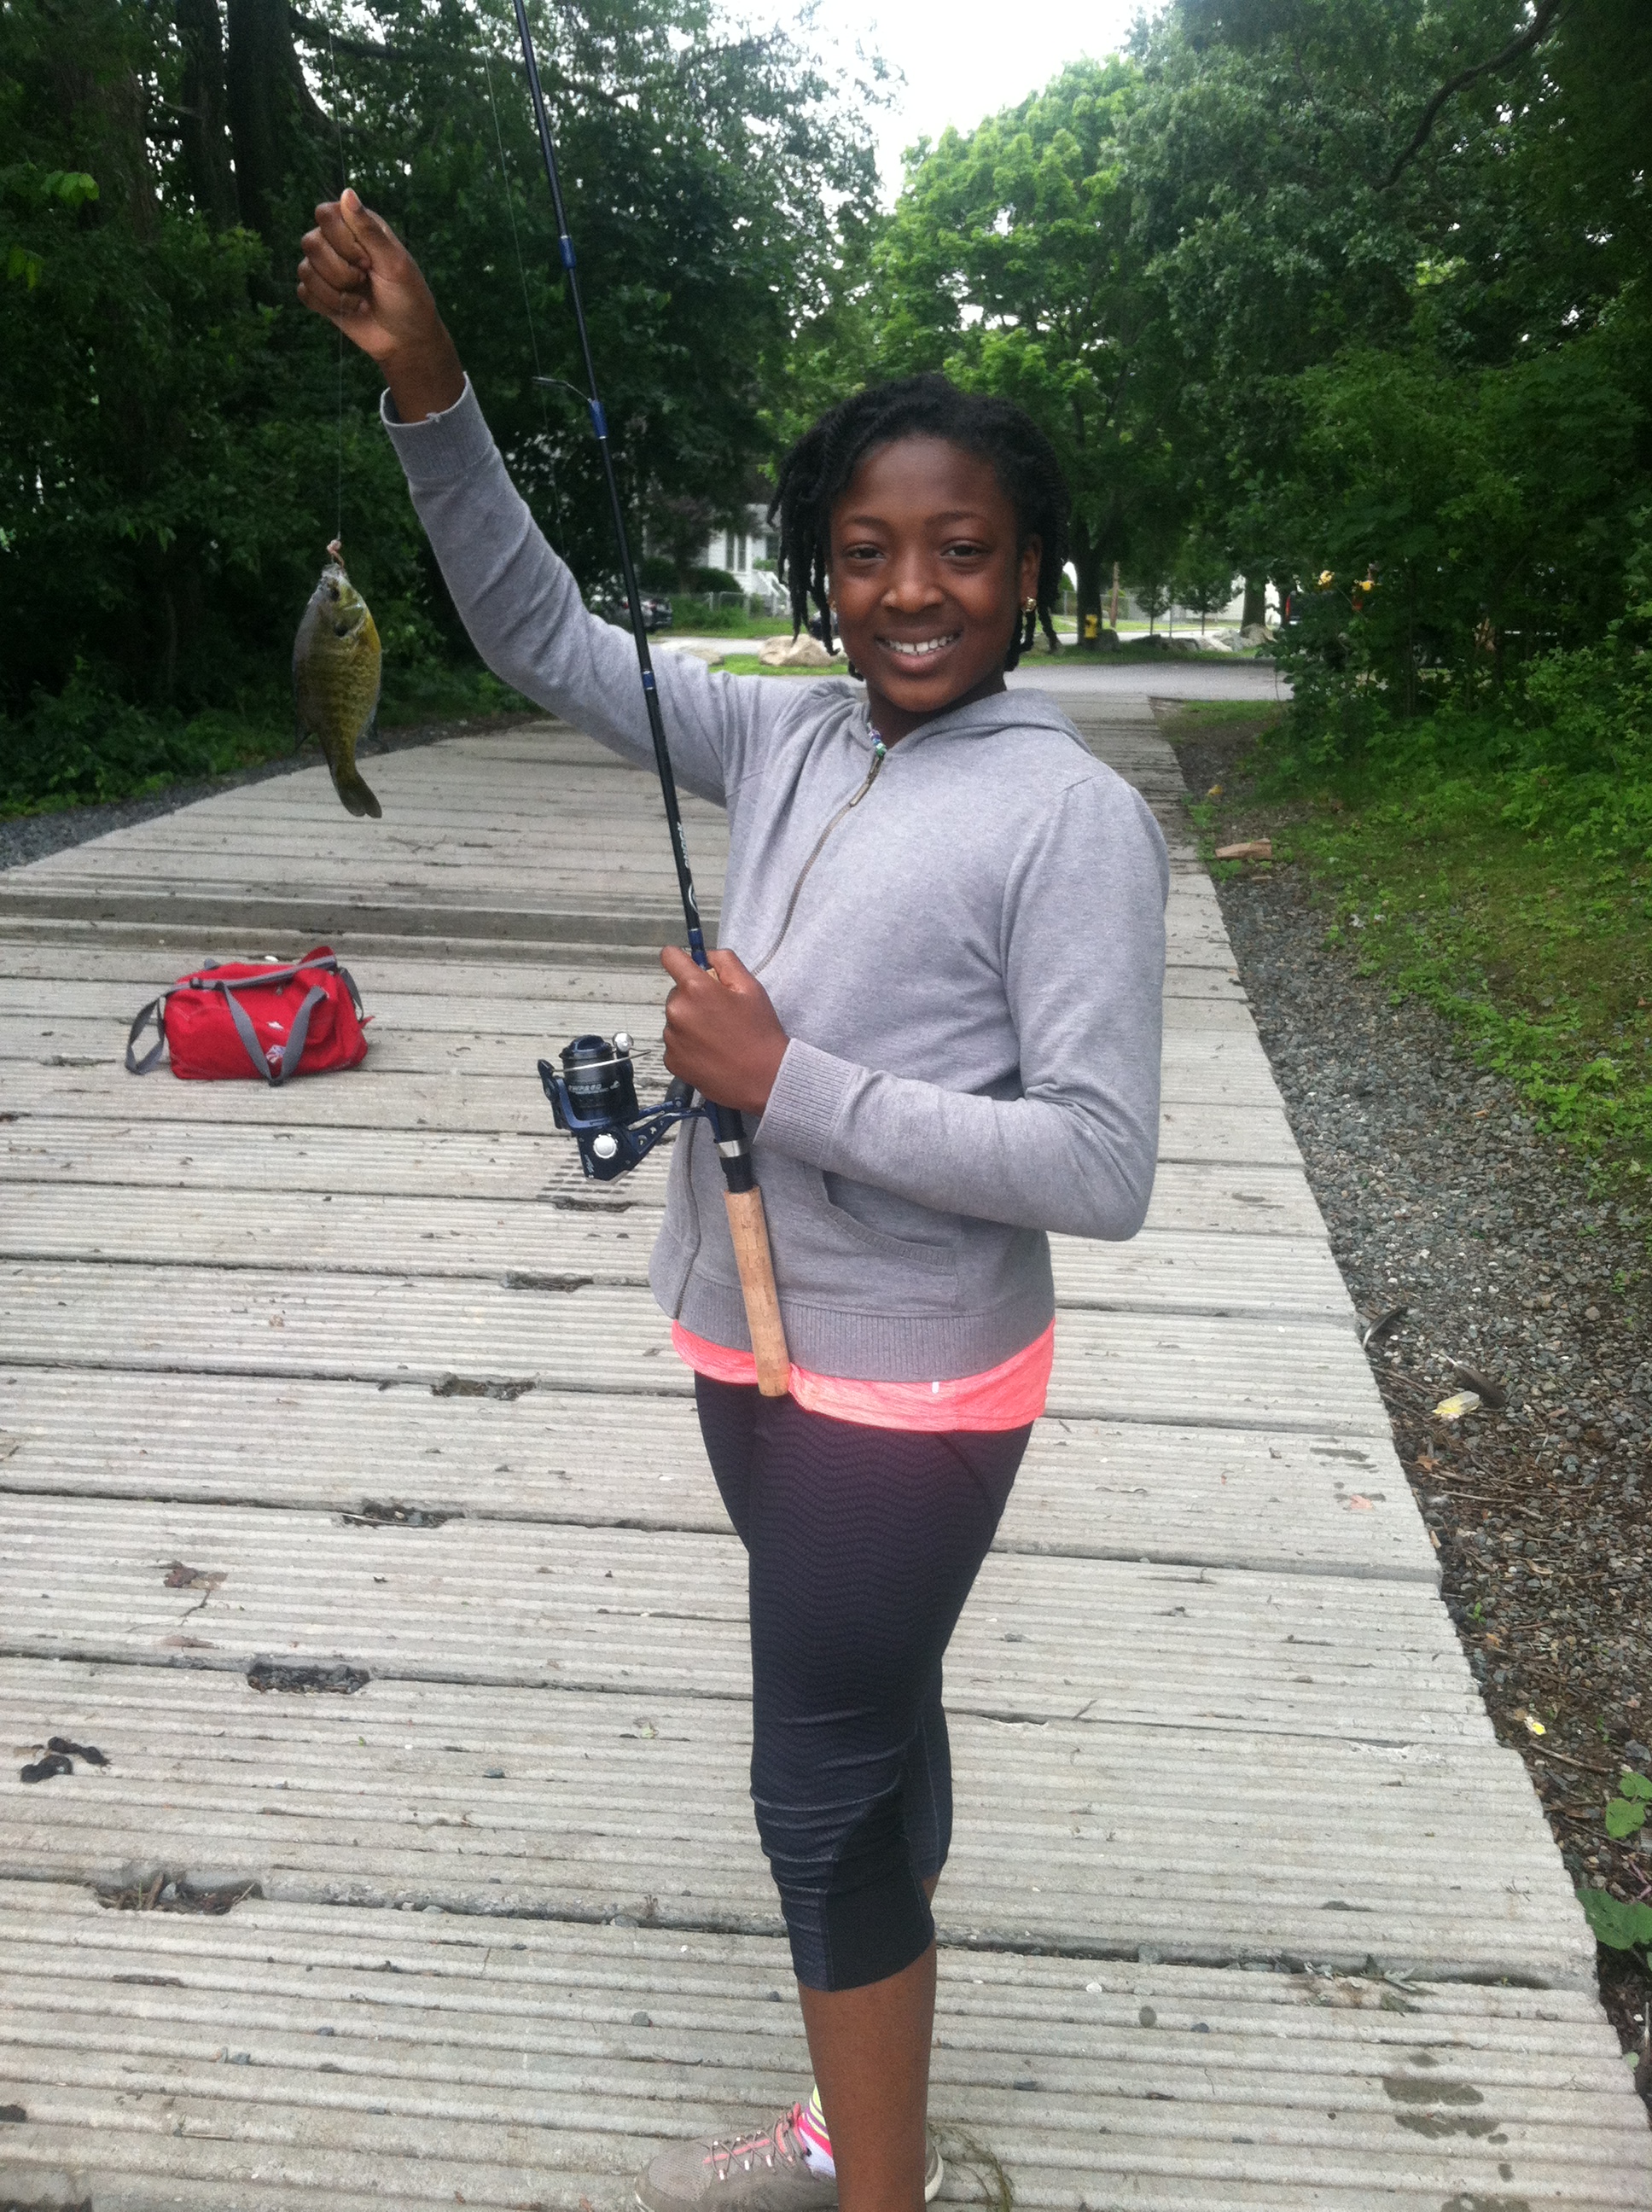 Fishing Academy – Youth Enrichment Services for Boston's Kids